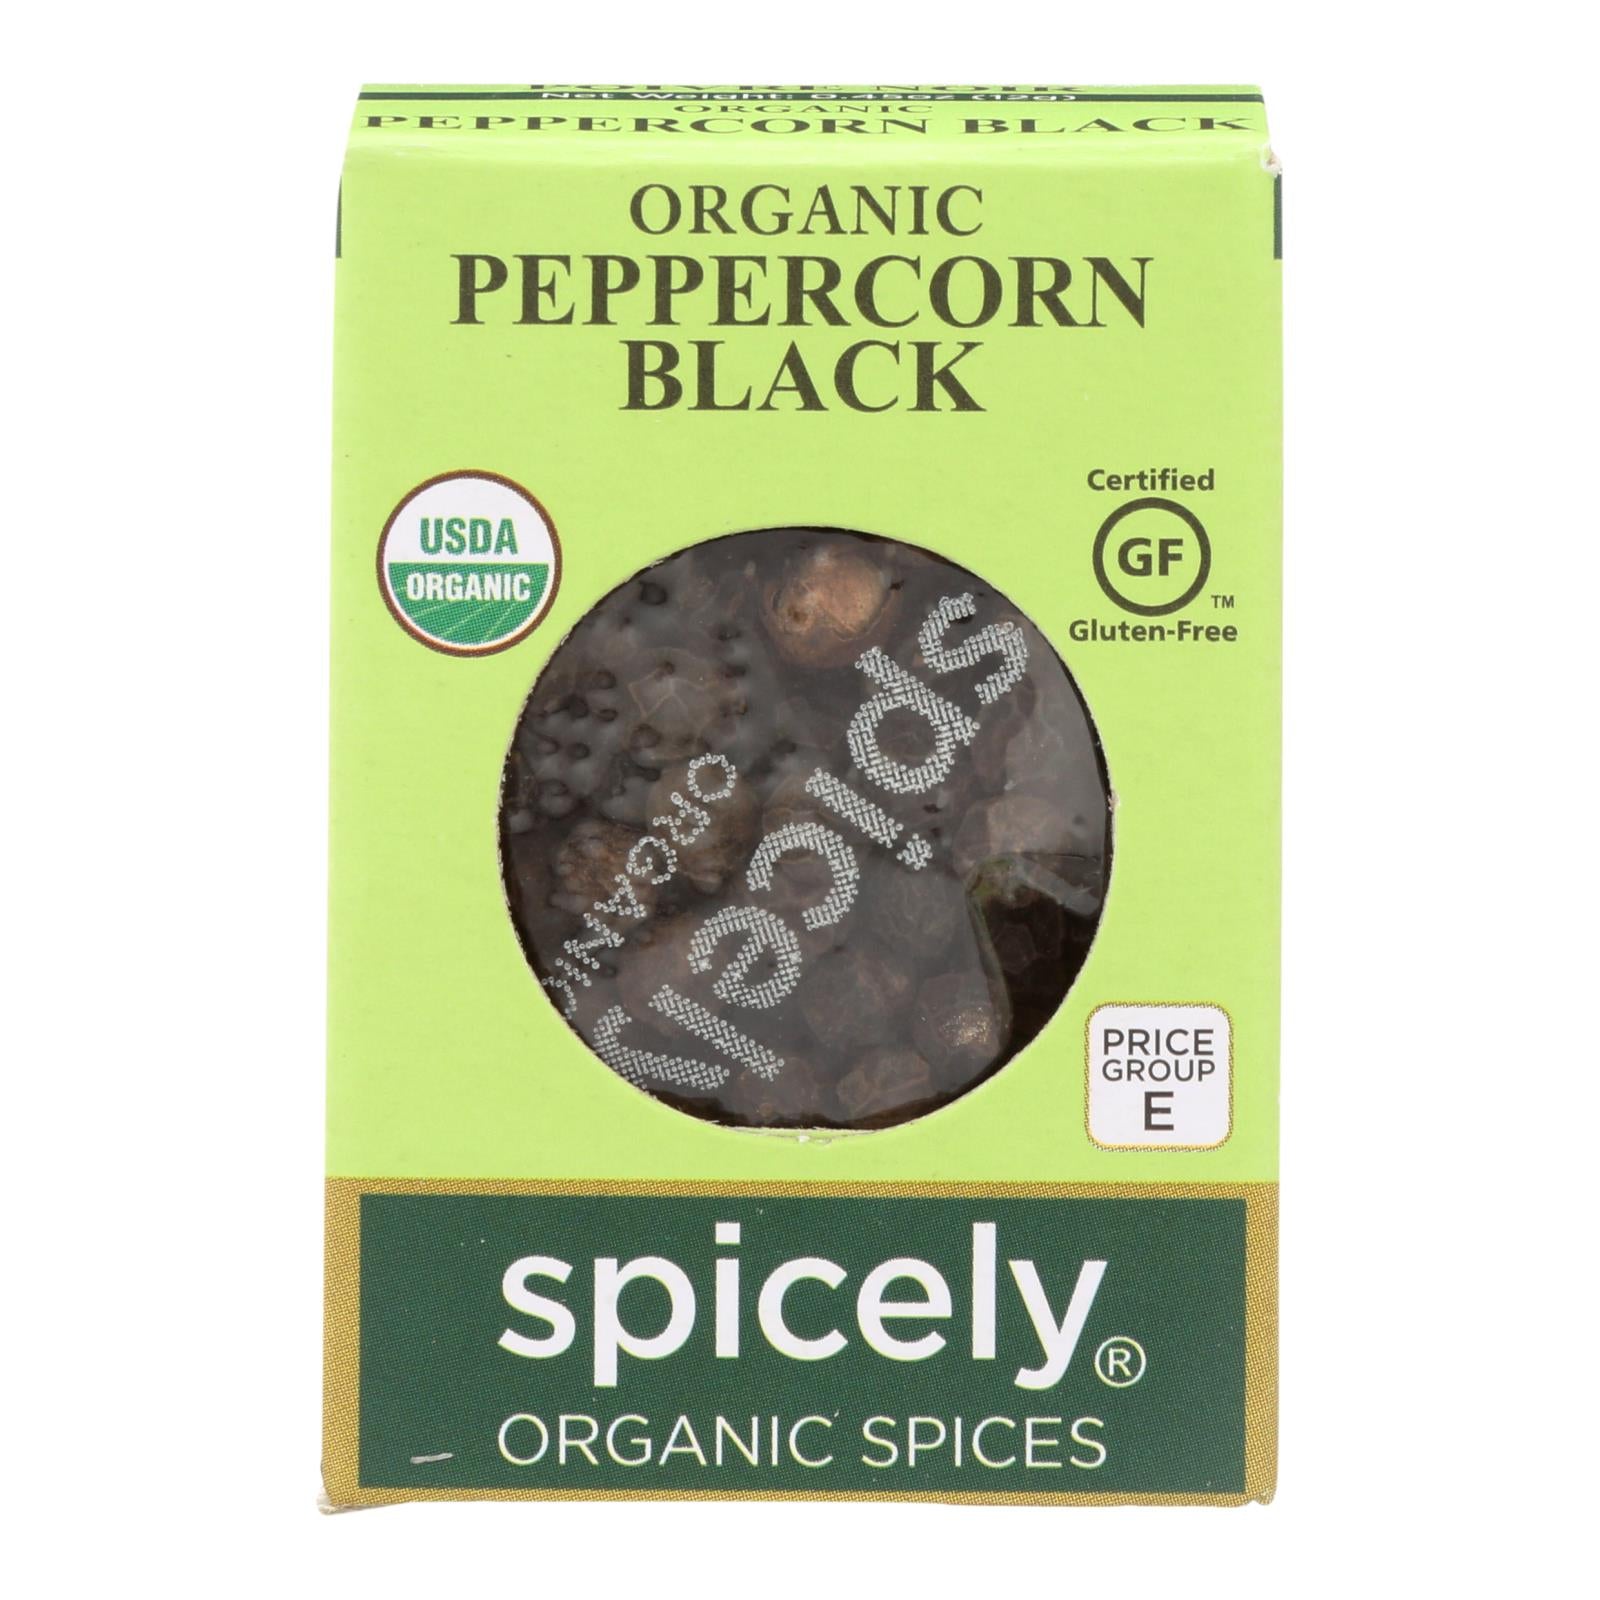 Spicely Organics - Organic Peppercorn - Black - Case Of 6 - 0.45 Oz. - Whole Green Foods